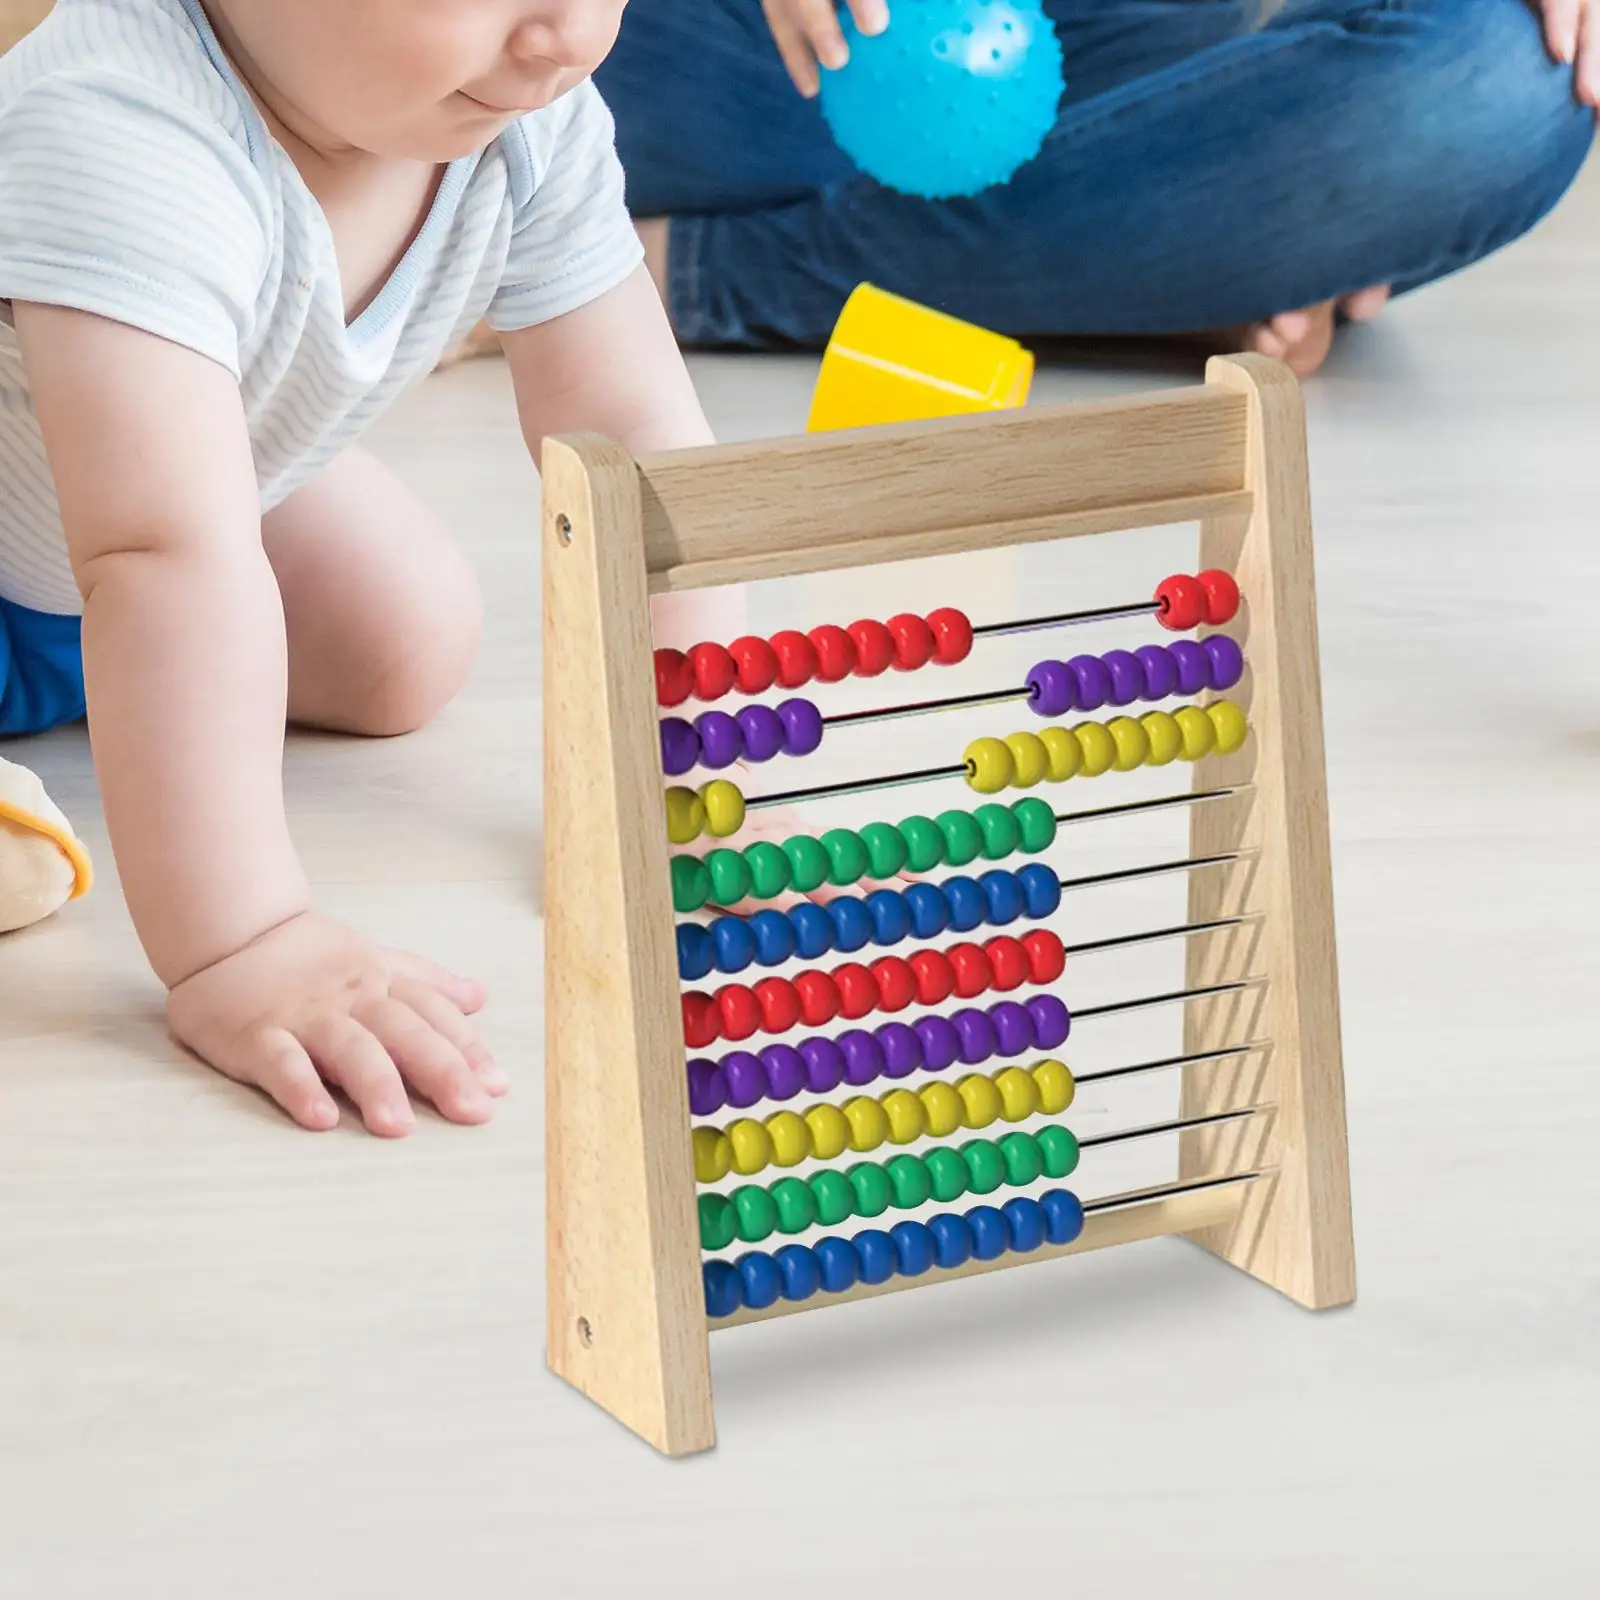 

10 Row Wooden Abacus Math Teaching Aids Addition Subtraction Math Learning Toys for Early Childhood Education Learning Preschool